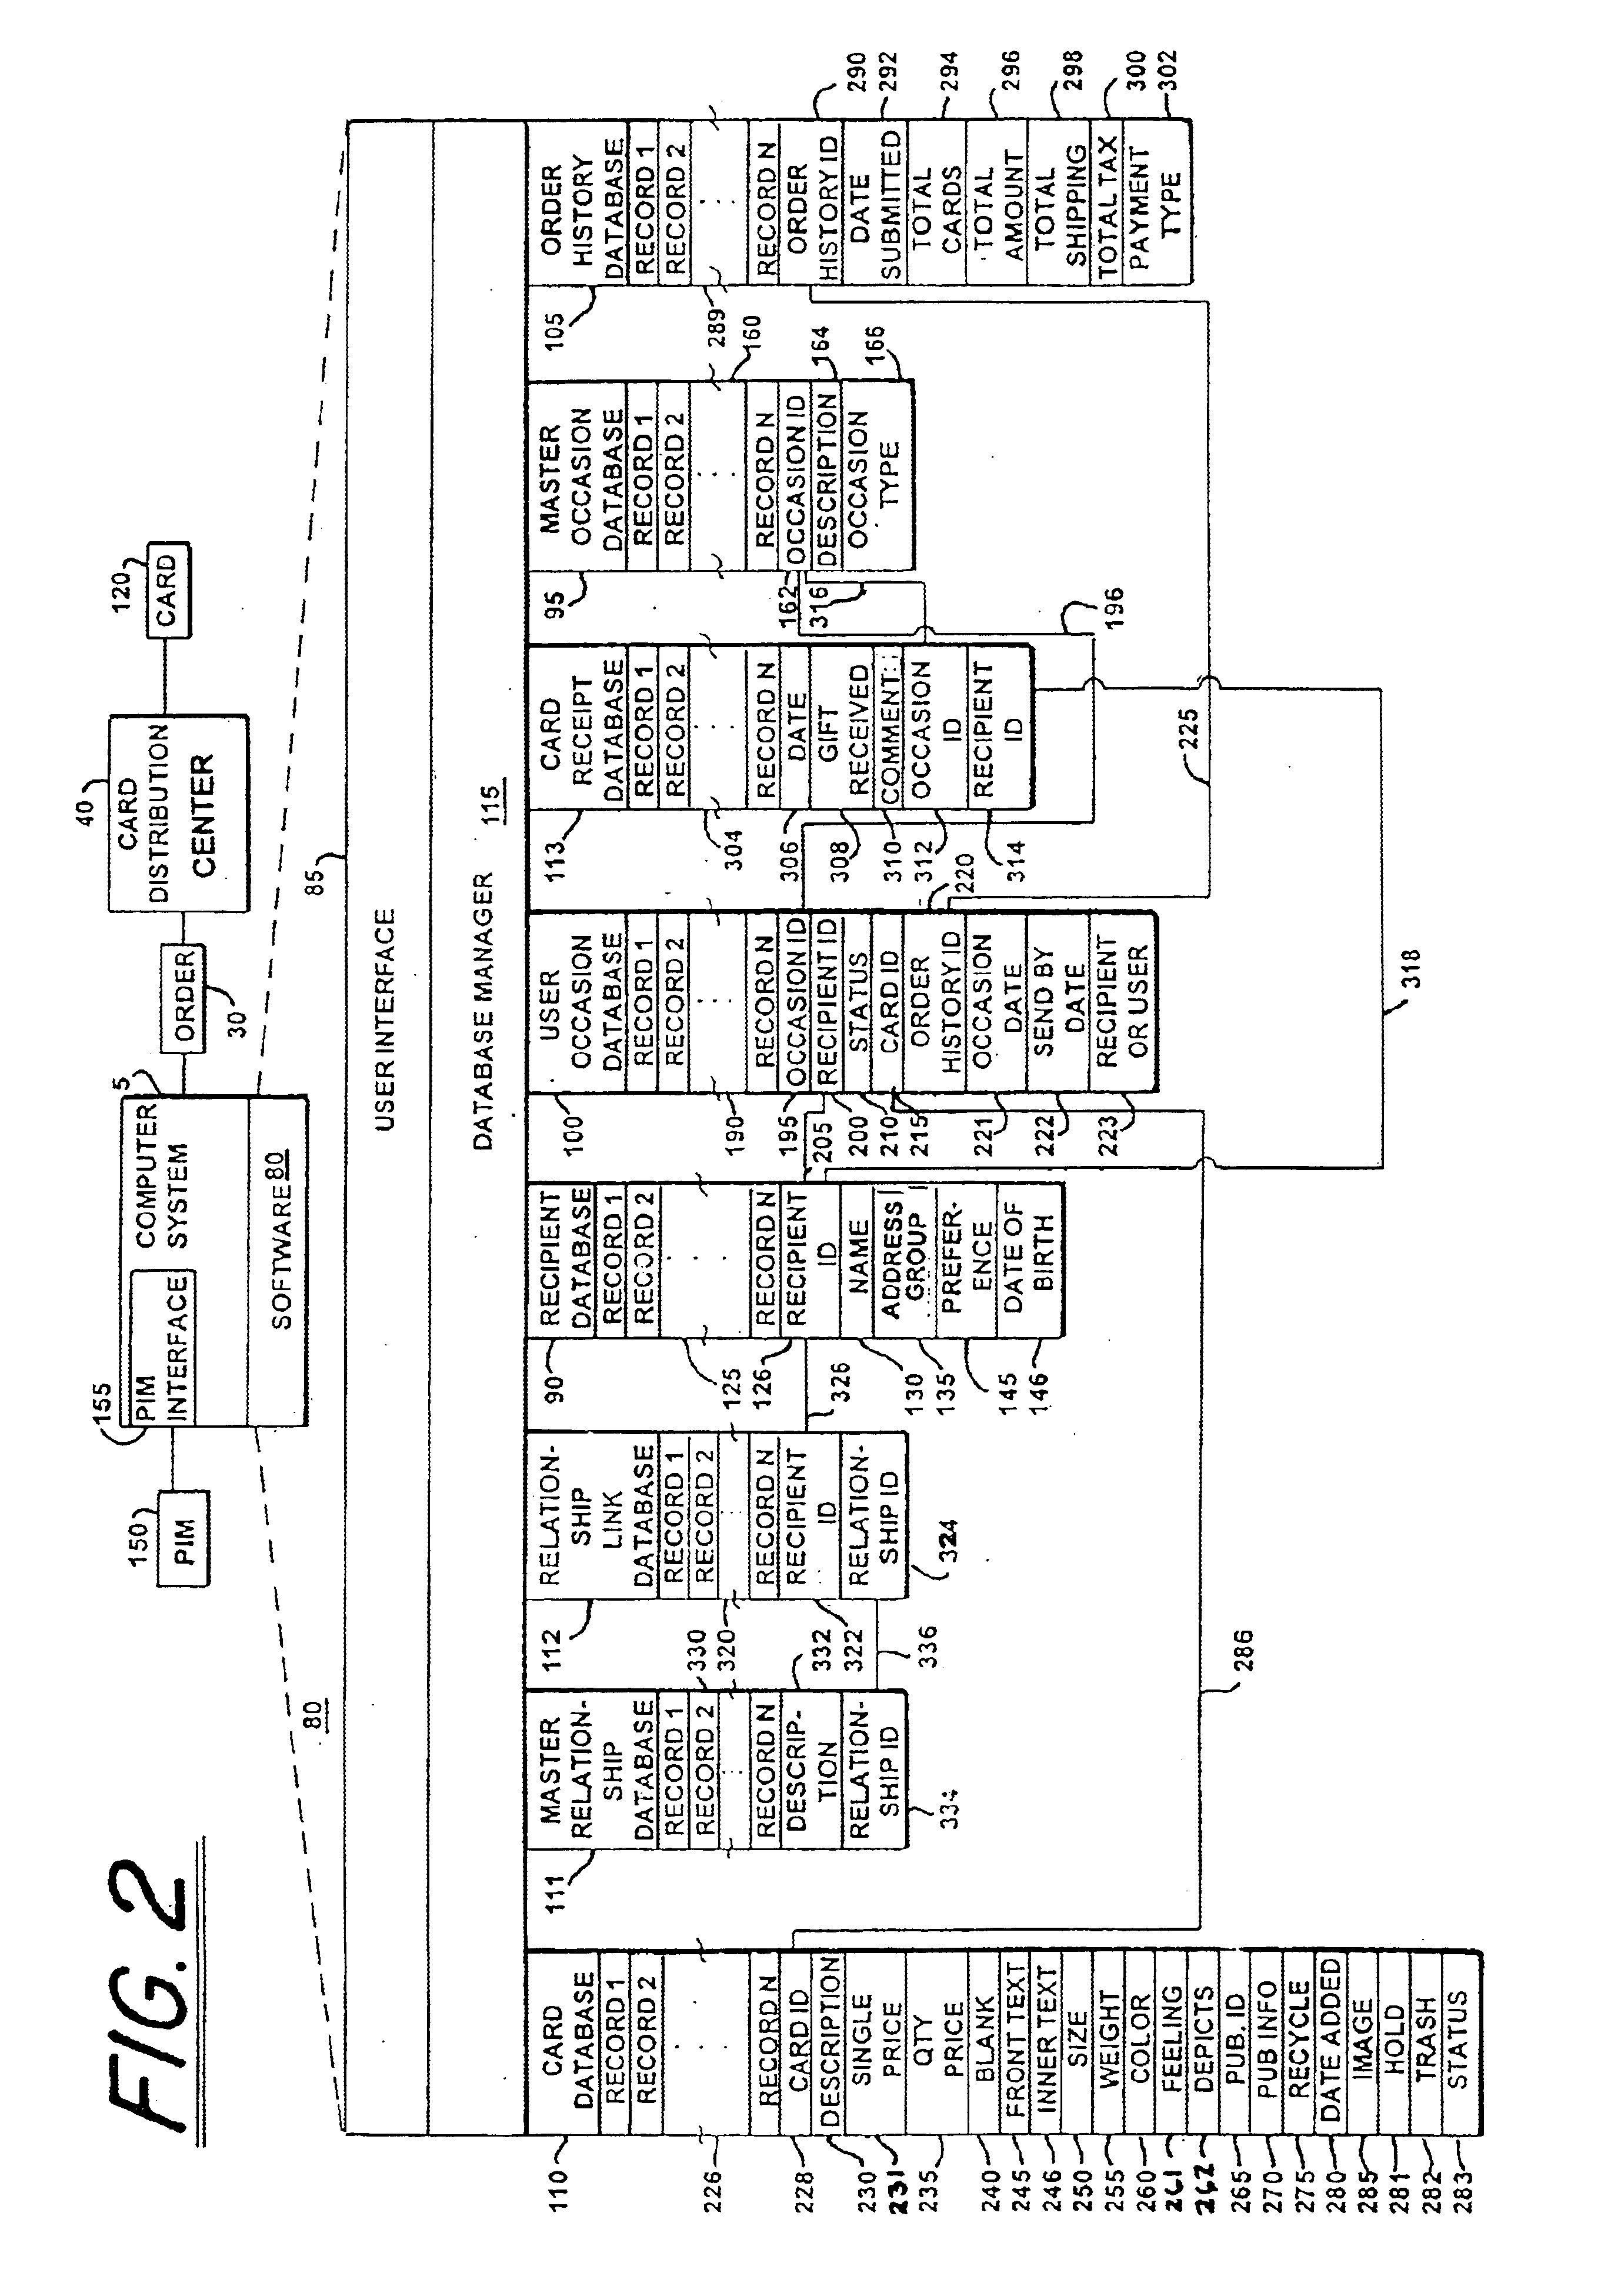 Method and apparatus for communicating with a card distribution center for selecting, ordering, and sending social expression cards